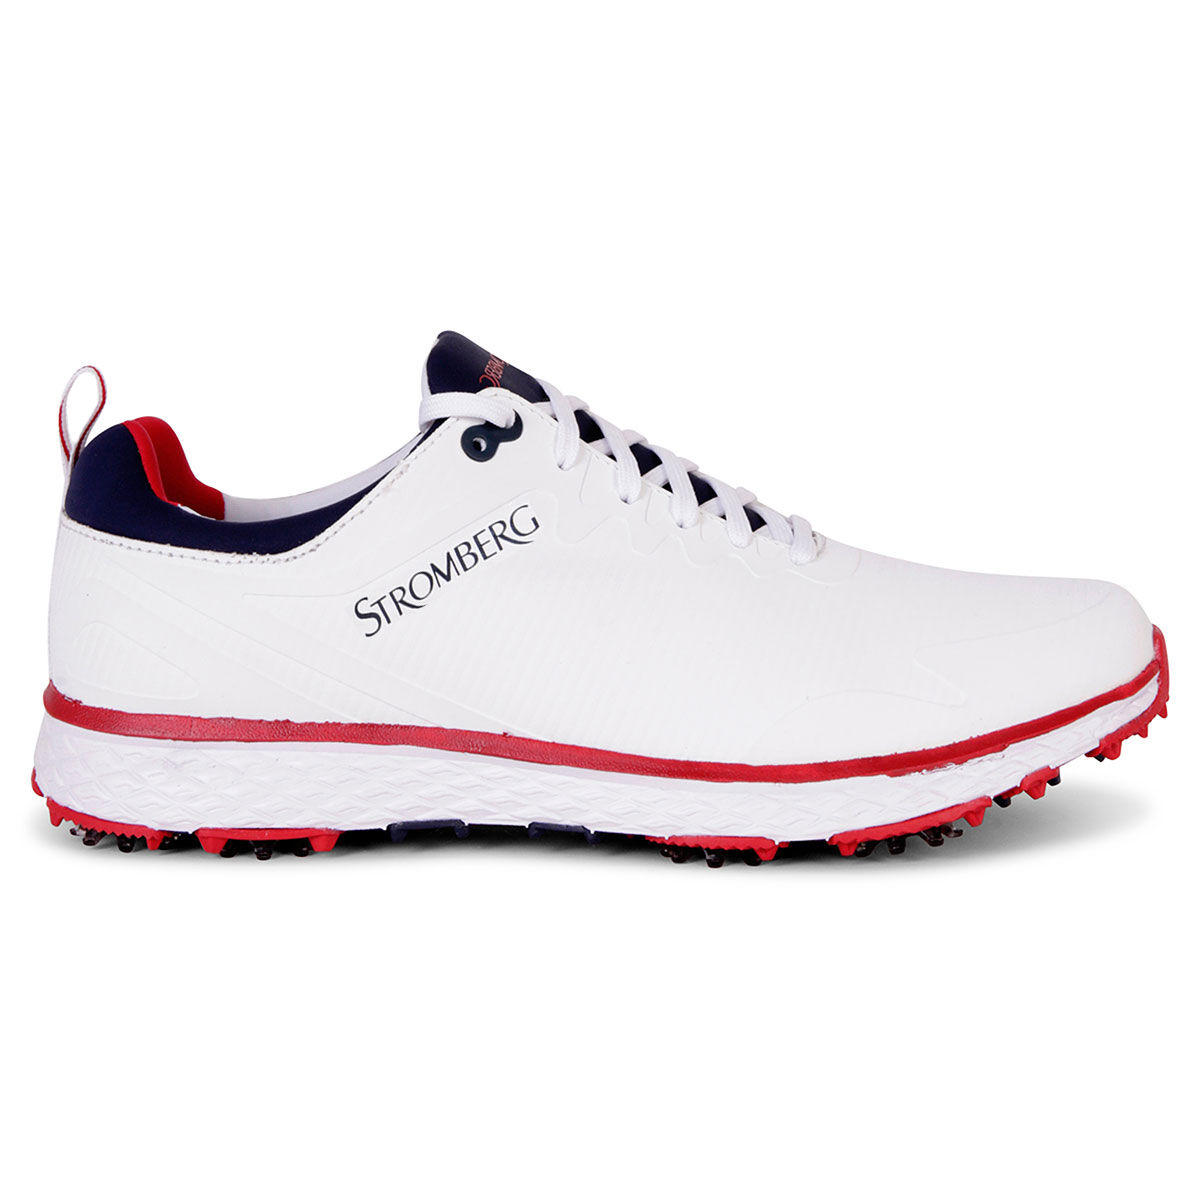 Stromberg Men’s Tempo Waterproof Spiked Golf Shoes, Mens, White/navy/red, 8 | American Golf